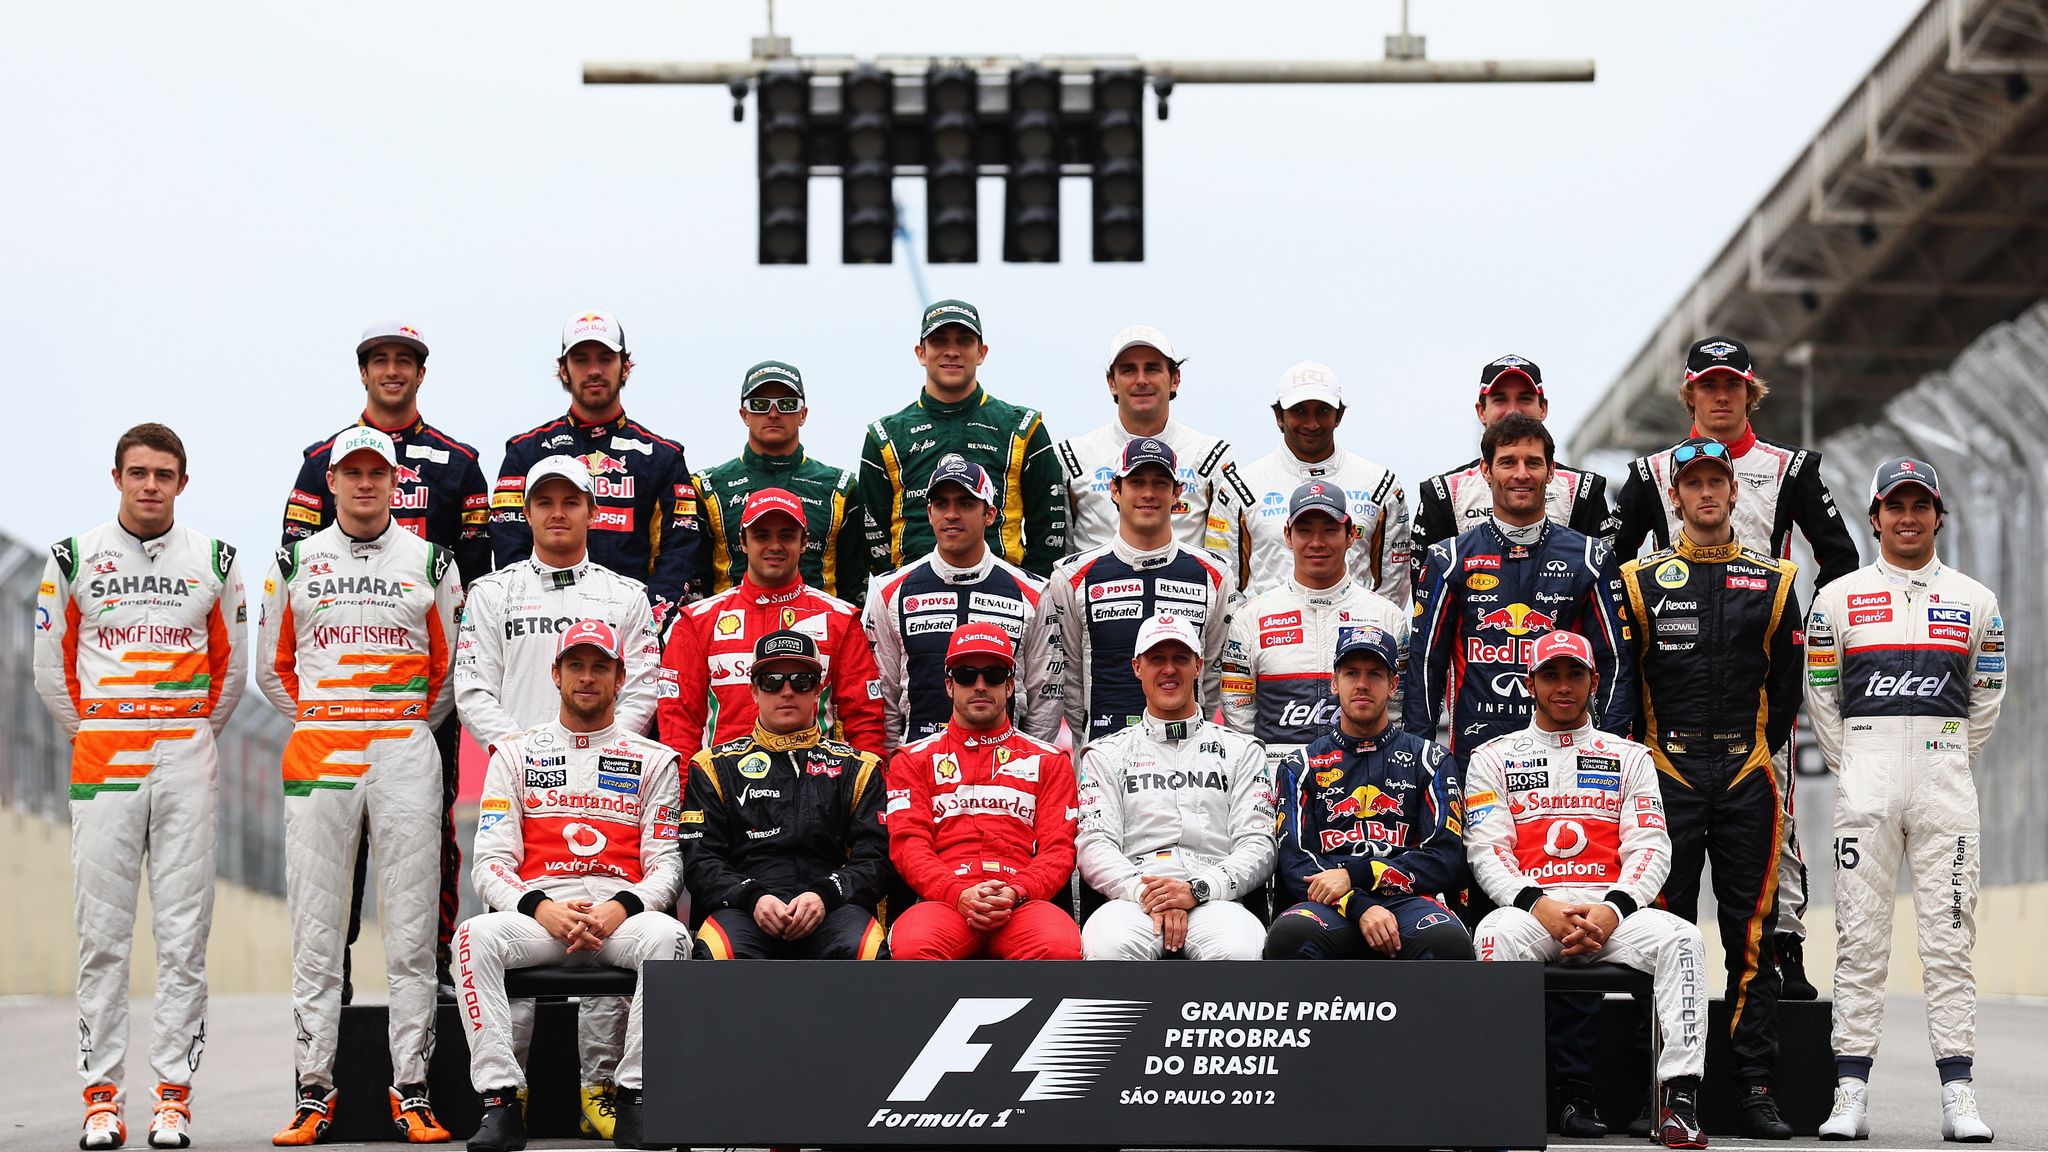 Class of 2012 Drivers Formula 1 (Brazil 2012) - that front row